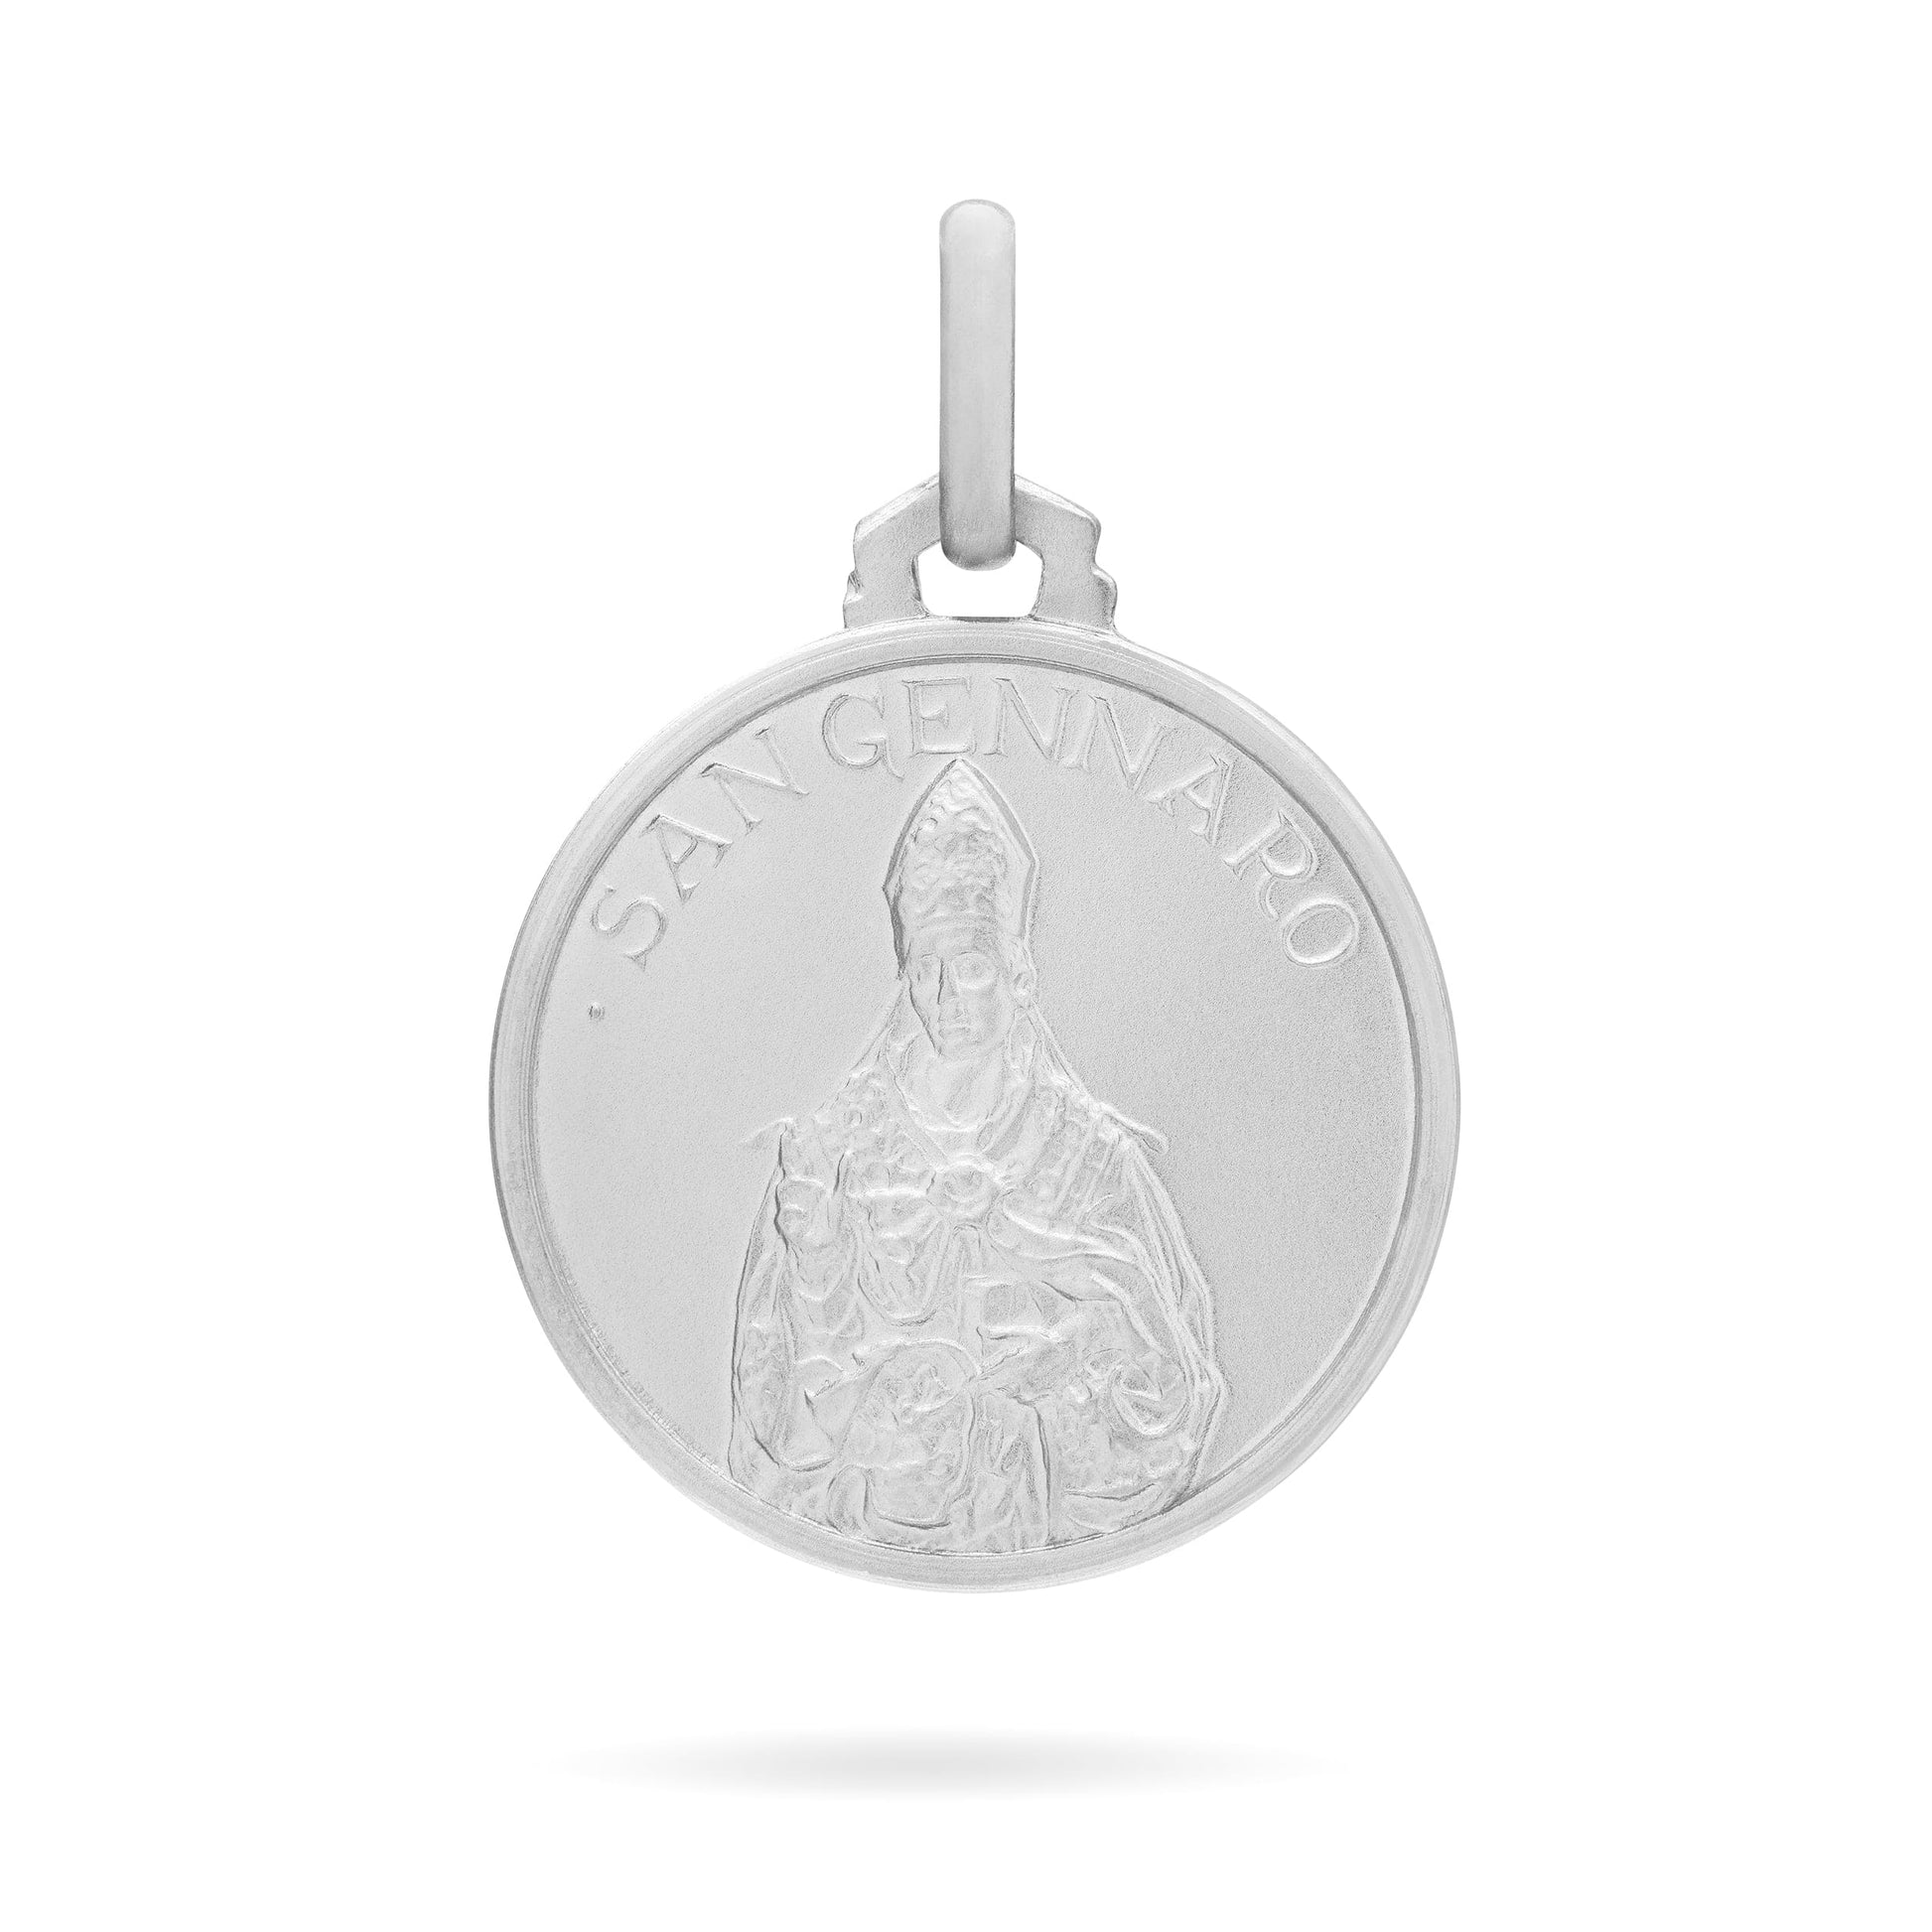 MONDO CATTOLICO Medal 18 mm (0.70 in) Sterling Silver Medal of Saint Januarius